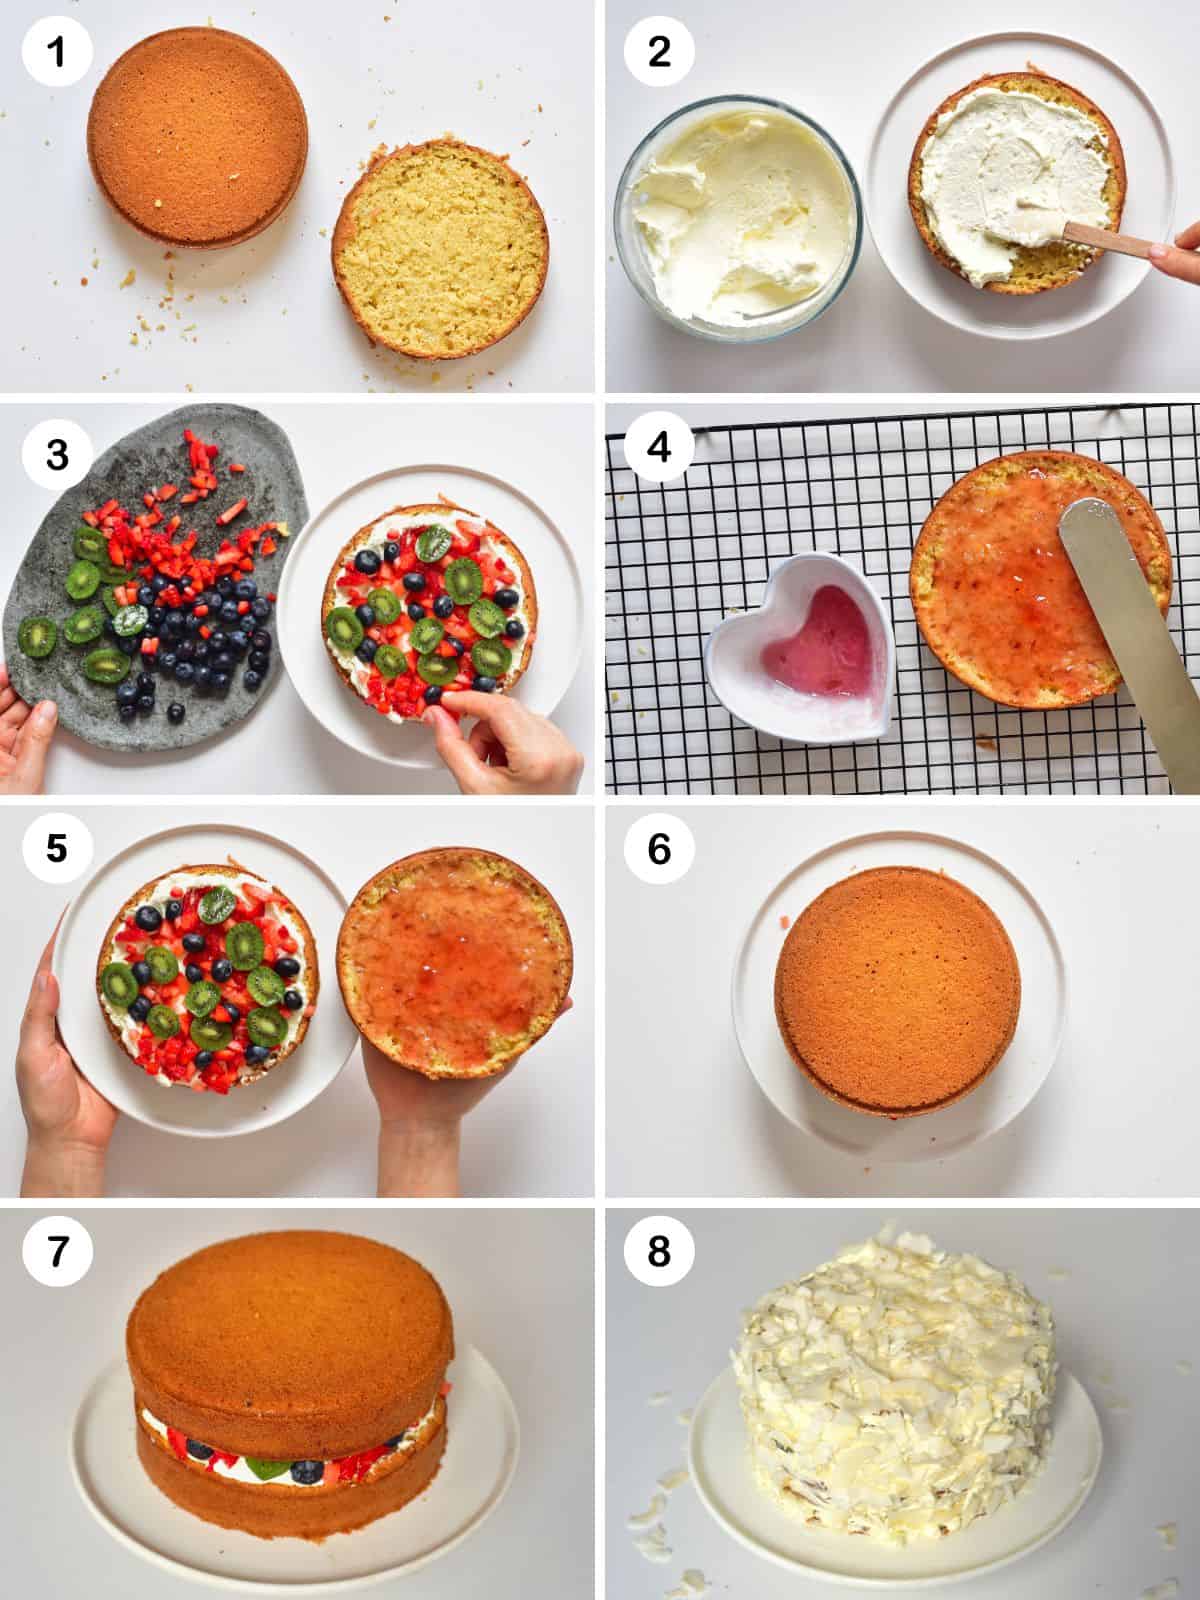 Steps for adding frosting and berries to cake